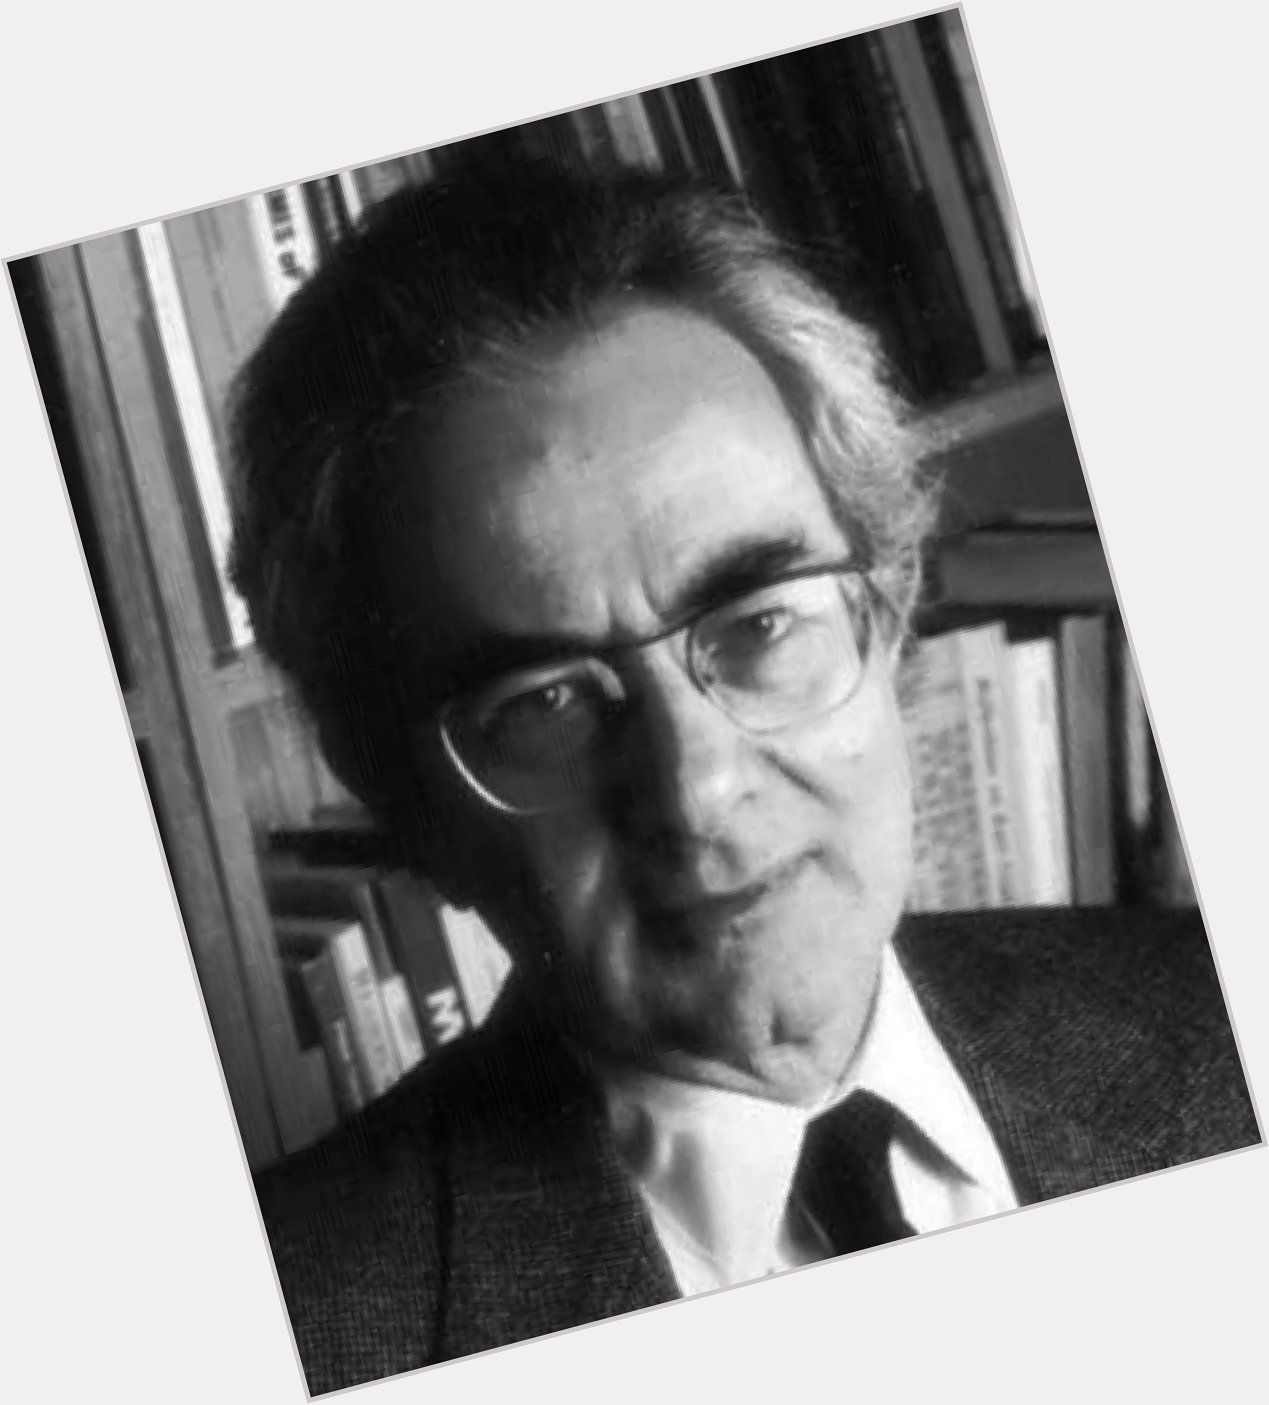 TPM wishes happy birthday to one of the most important philosophers of a generation, Thomas Nagel. Born Day 